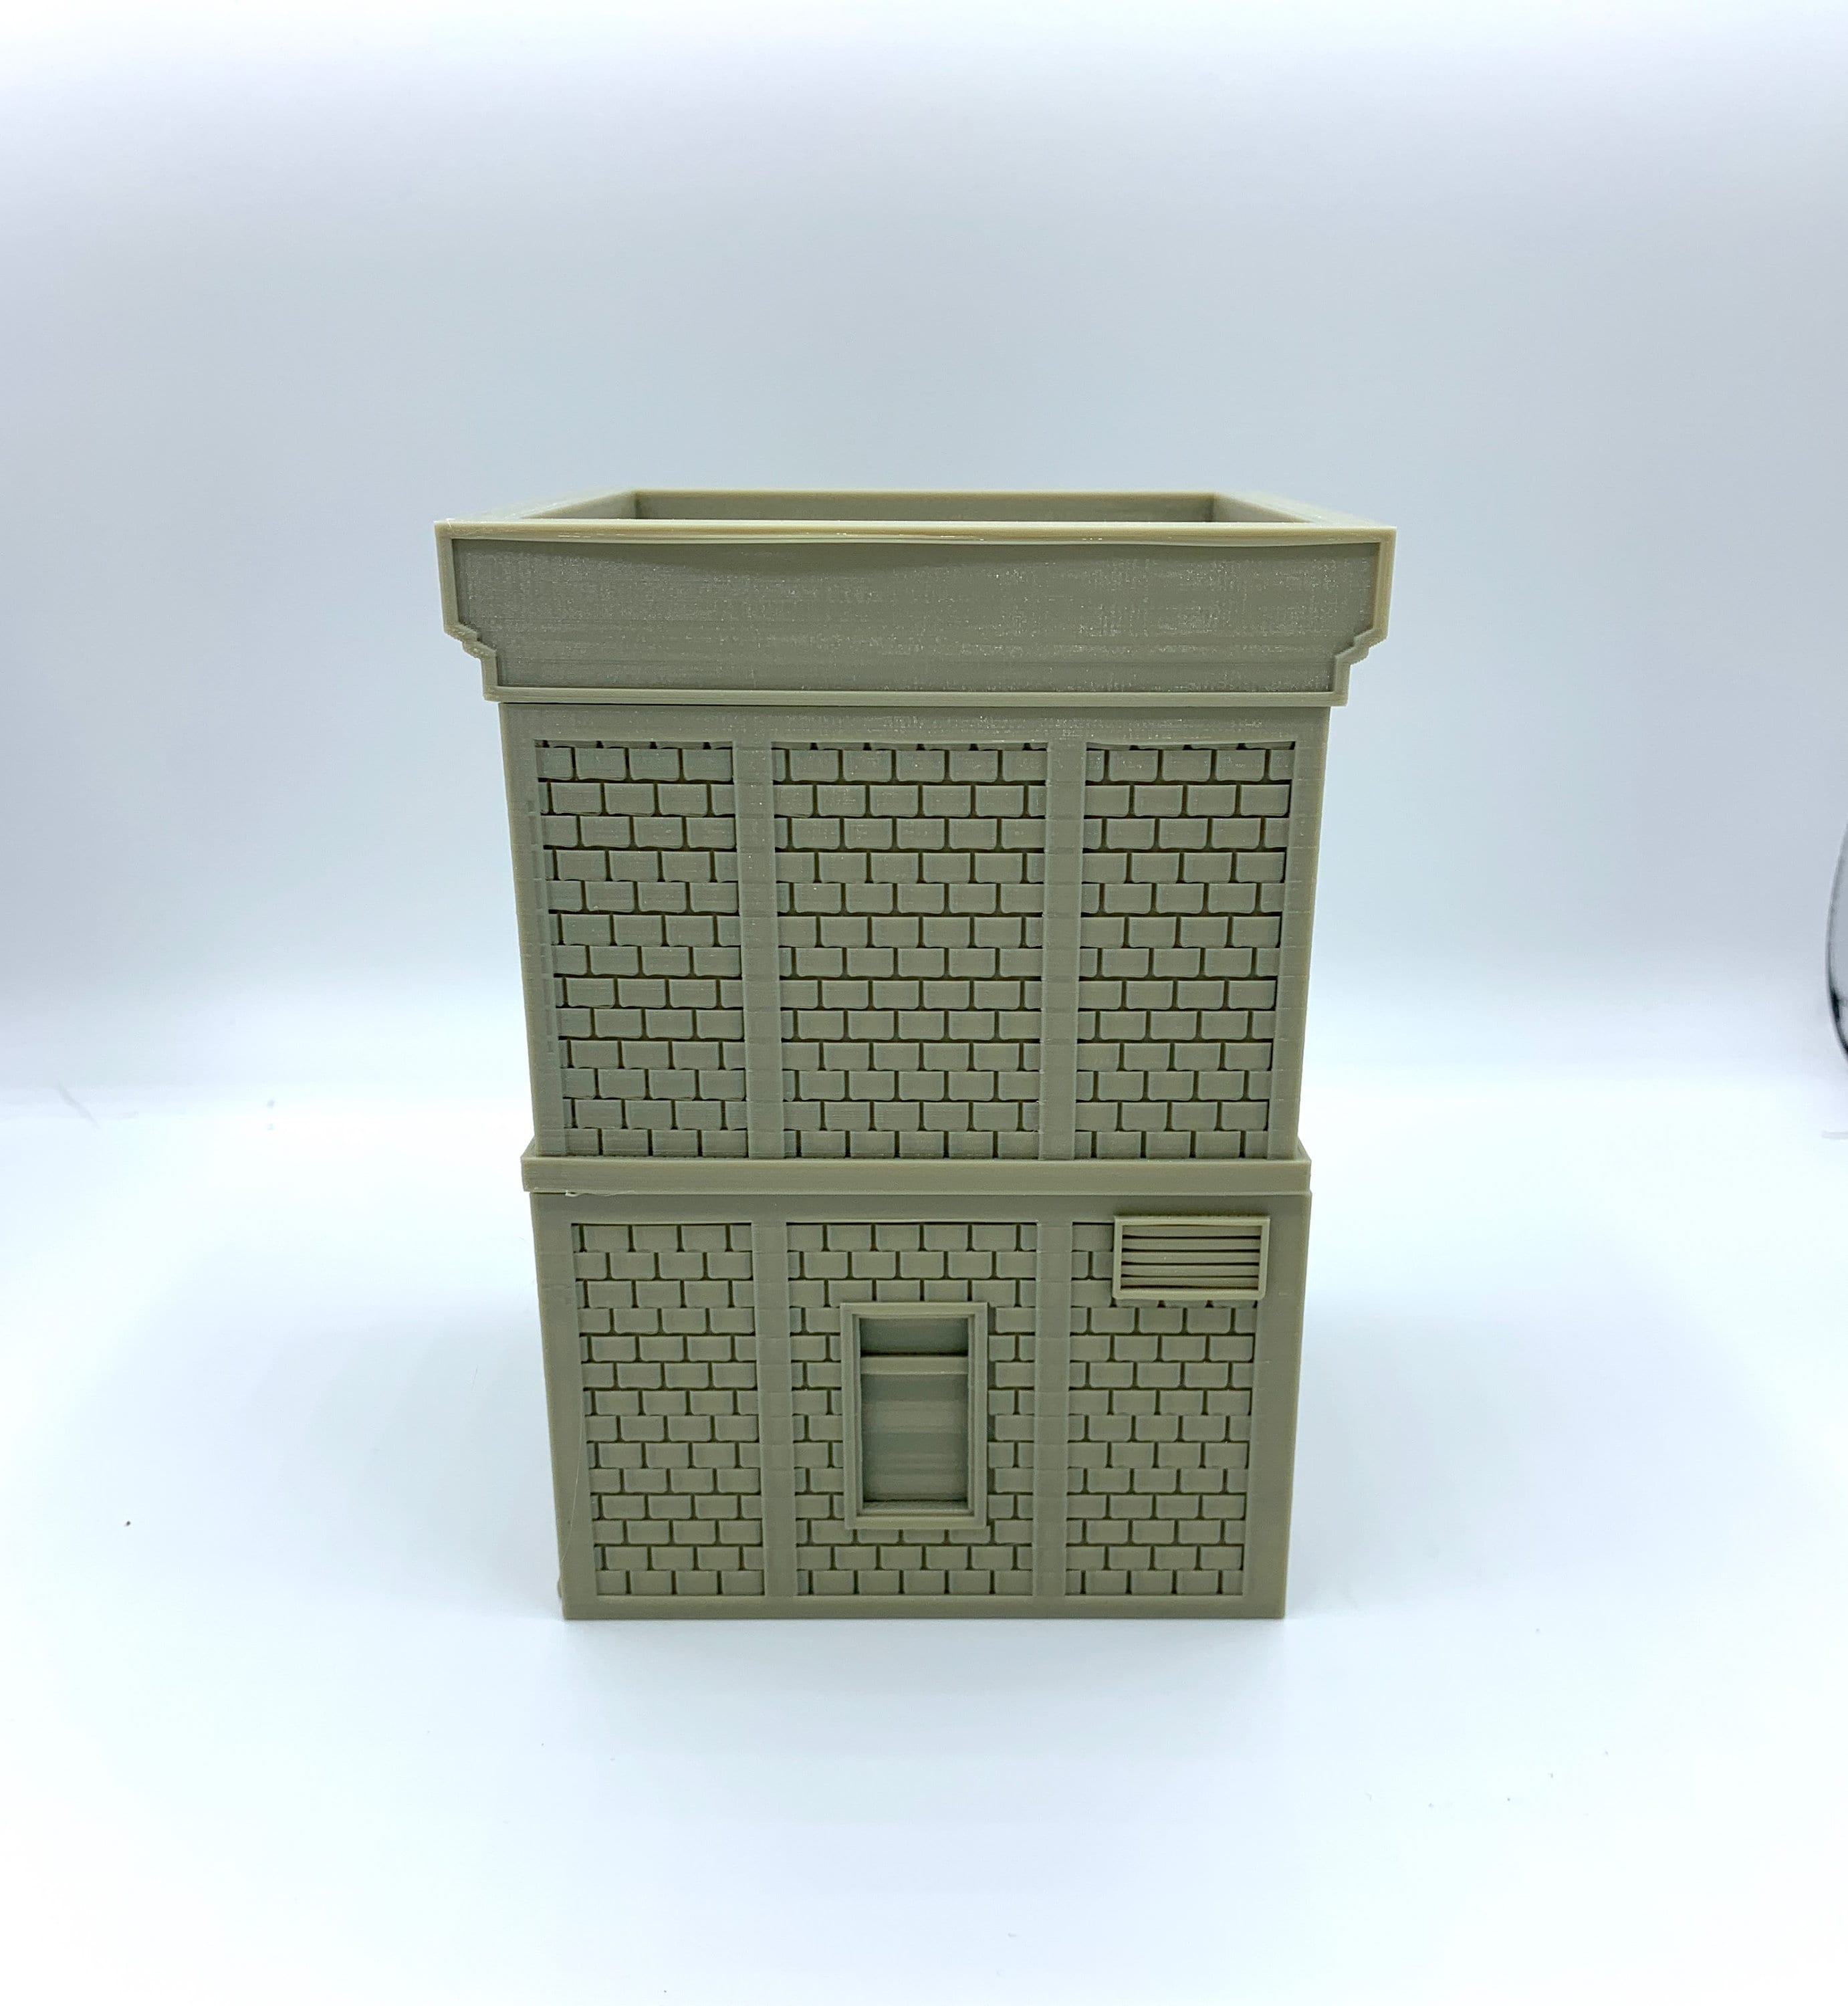 3d Printed Post Office / Crisis Protocol Compatible Option / Corvus Games Terrain Licensed Printer / Print to Order